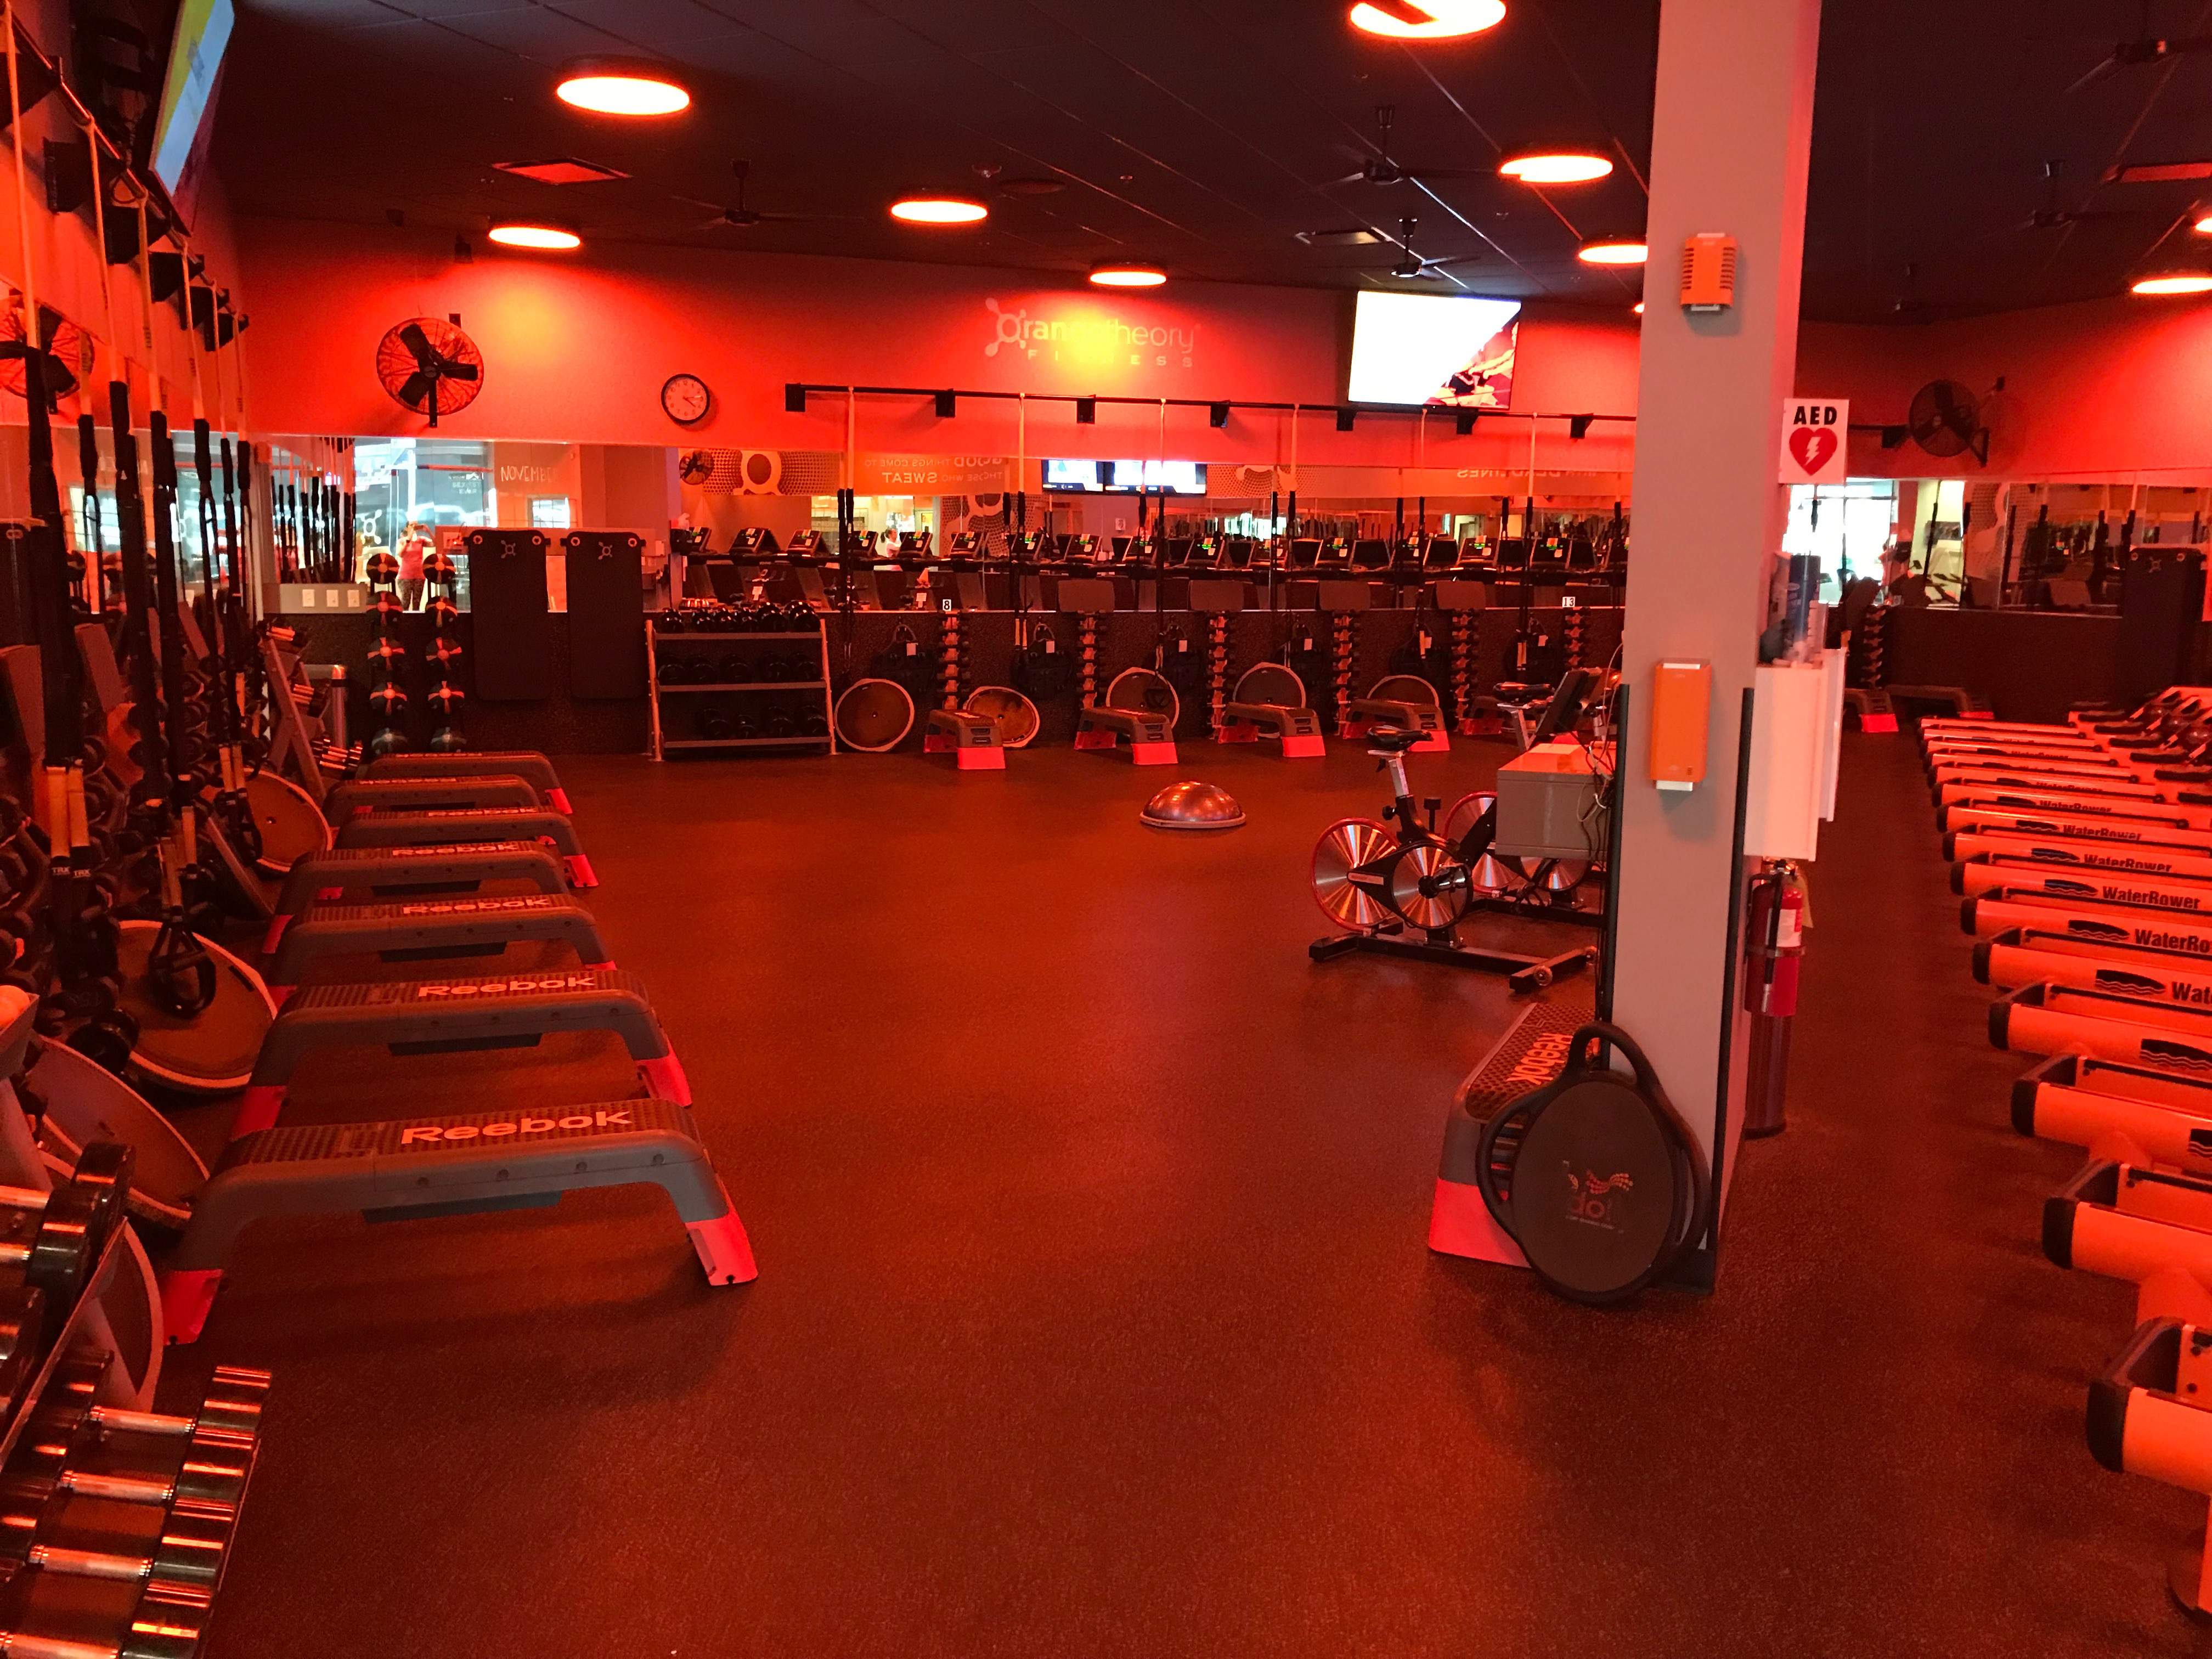 My experience with Orangetheory Fitness - So what? Now what?